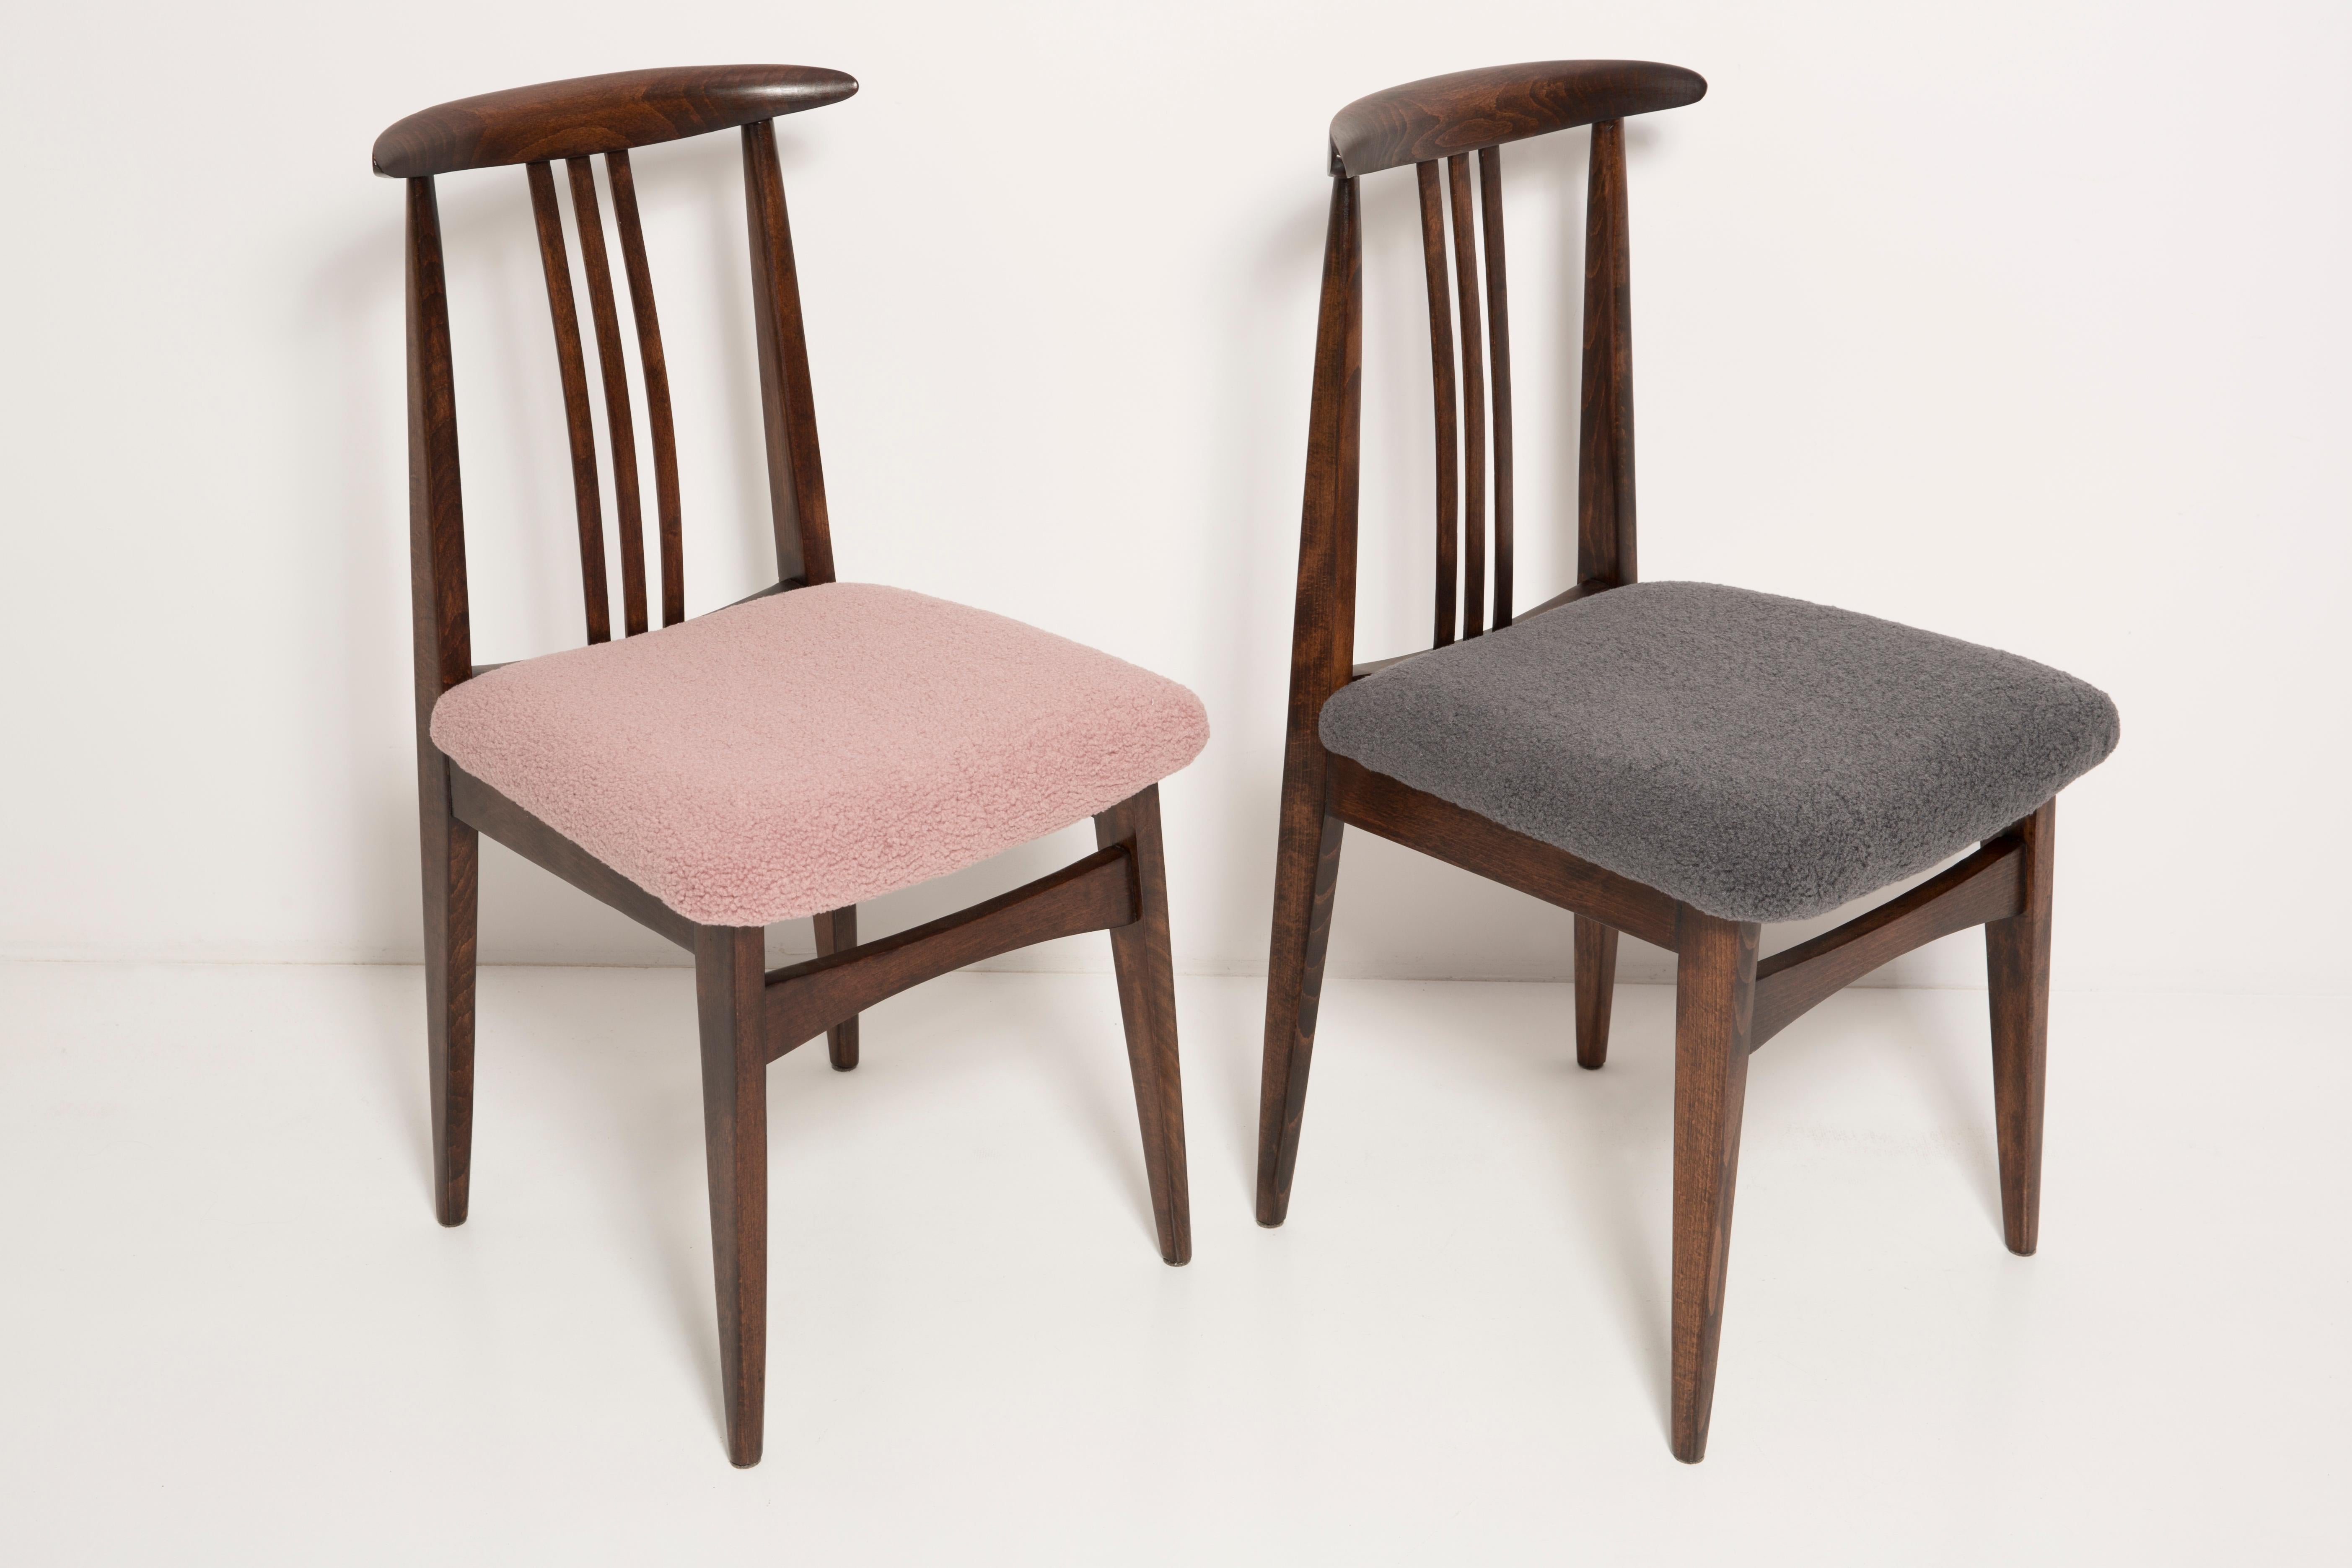 A beautiful beech chairs designed by M. Zielinski, type 200 / 100B. Manufactured by the Opole Furniture Industry Center at the end of the 1960s in Poland. The chairs are after undergone a complete carpentry and upholstery renovation. Seats covered